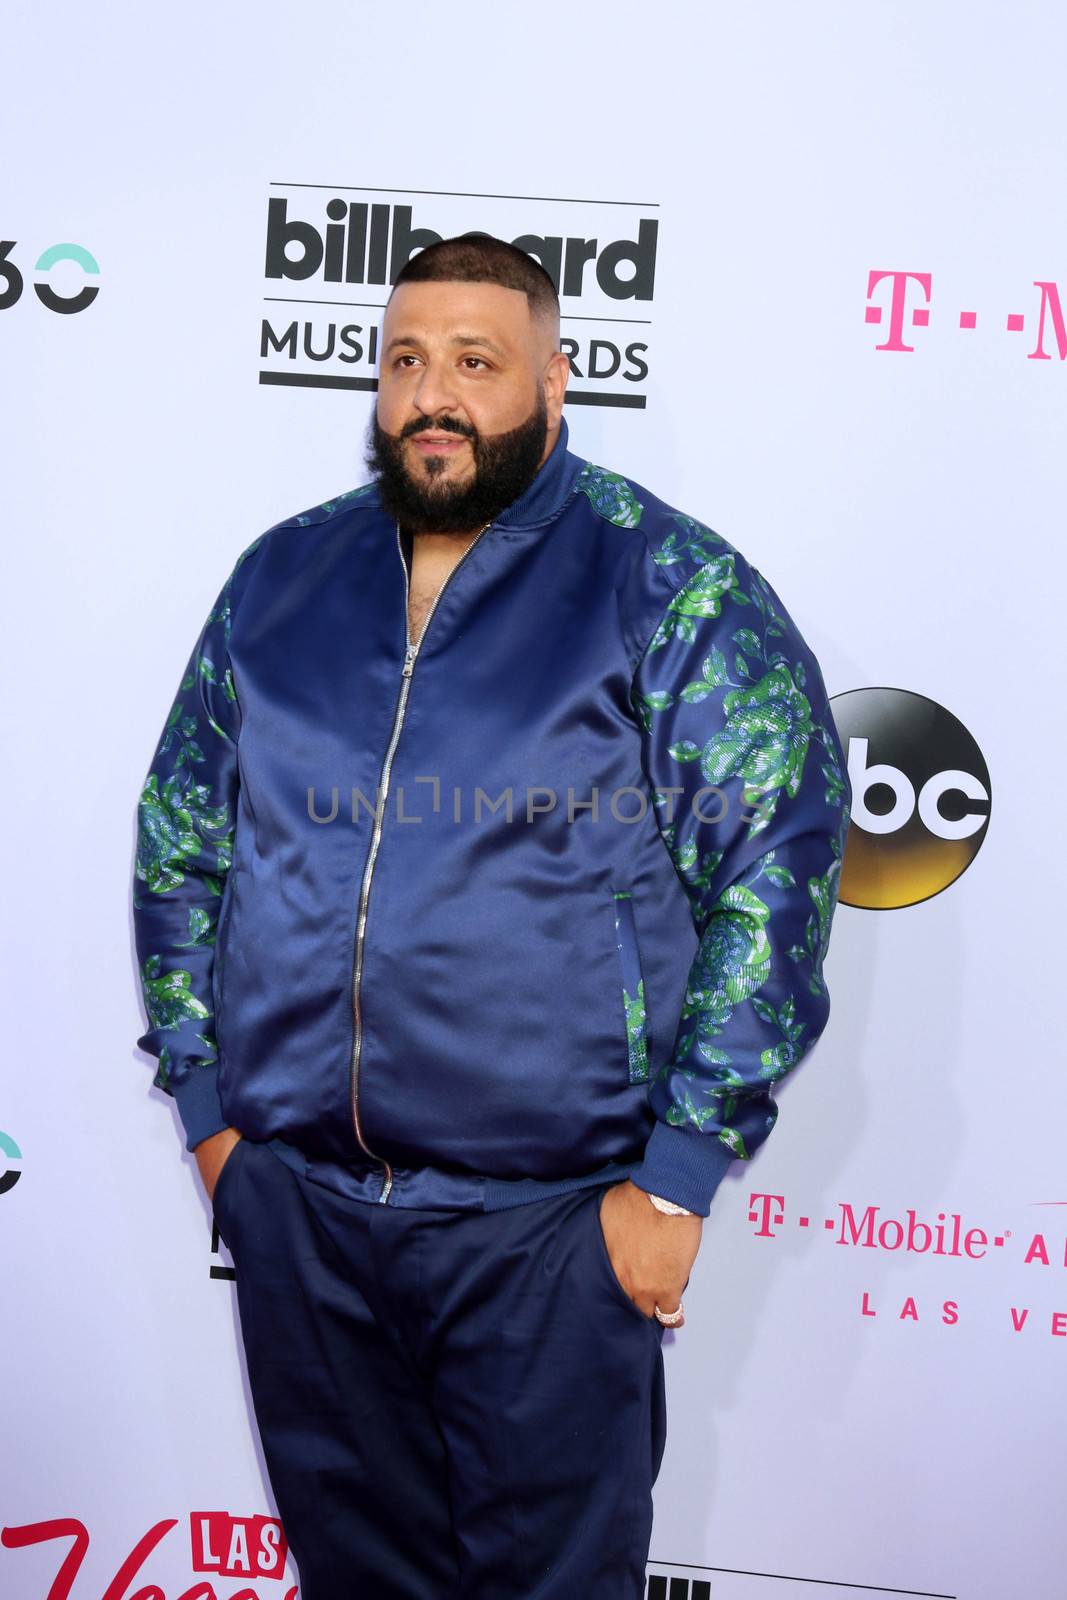 DJ Khaled
at the 2017 Billboard Awards Arrivals, T-Mobile Arena, Las Vegas, NV 05-21-17/ImageCollect by ImageCollect